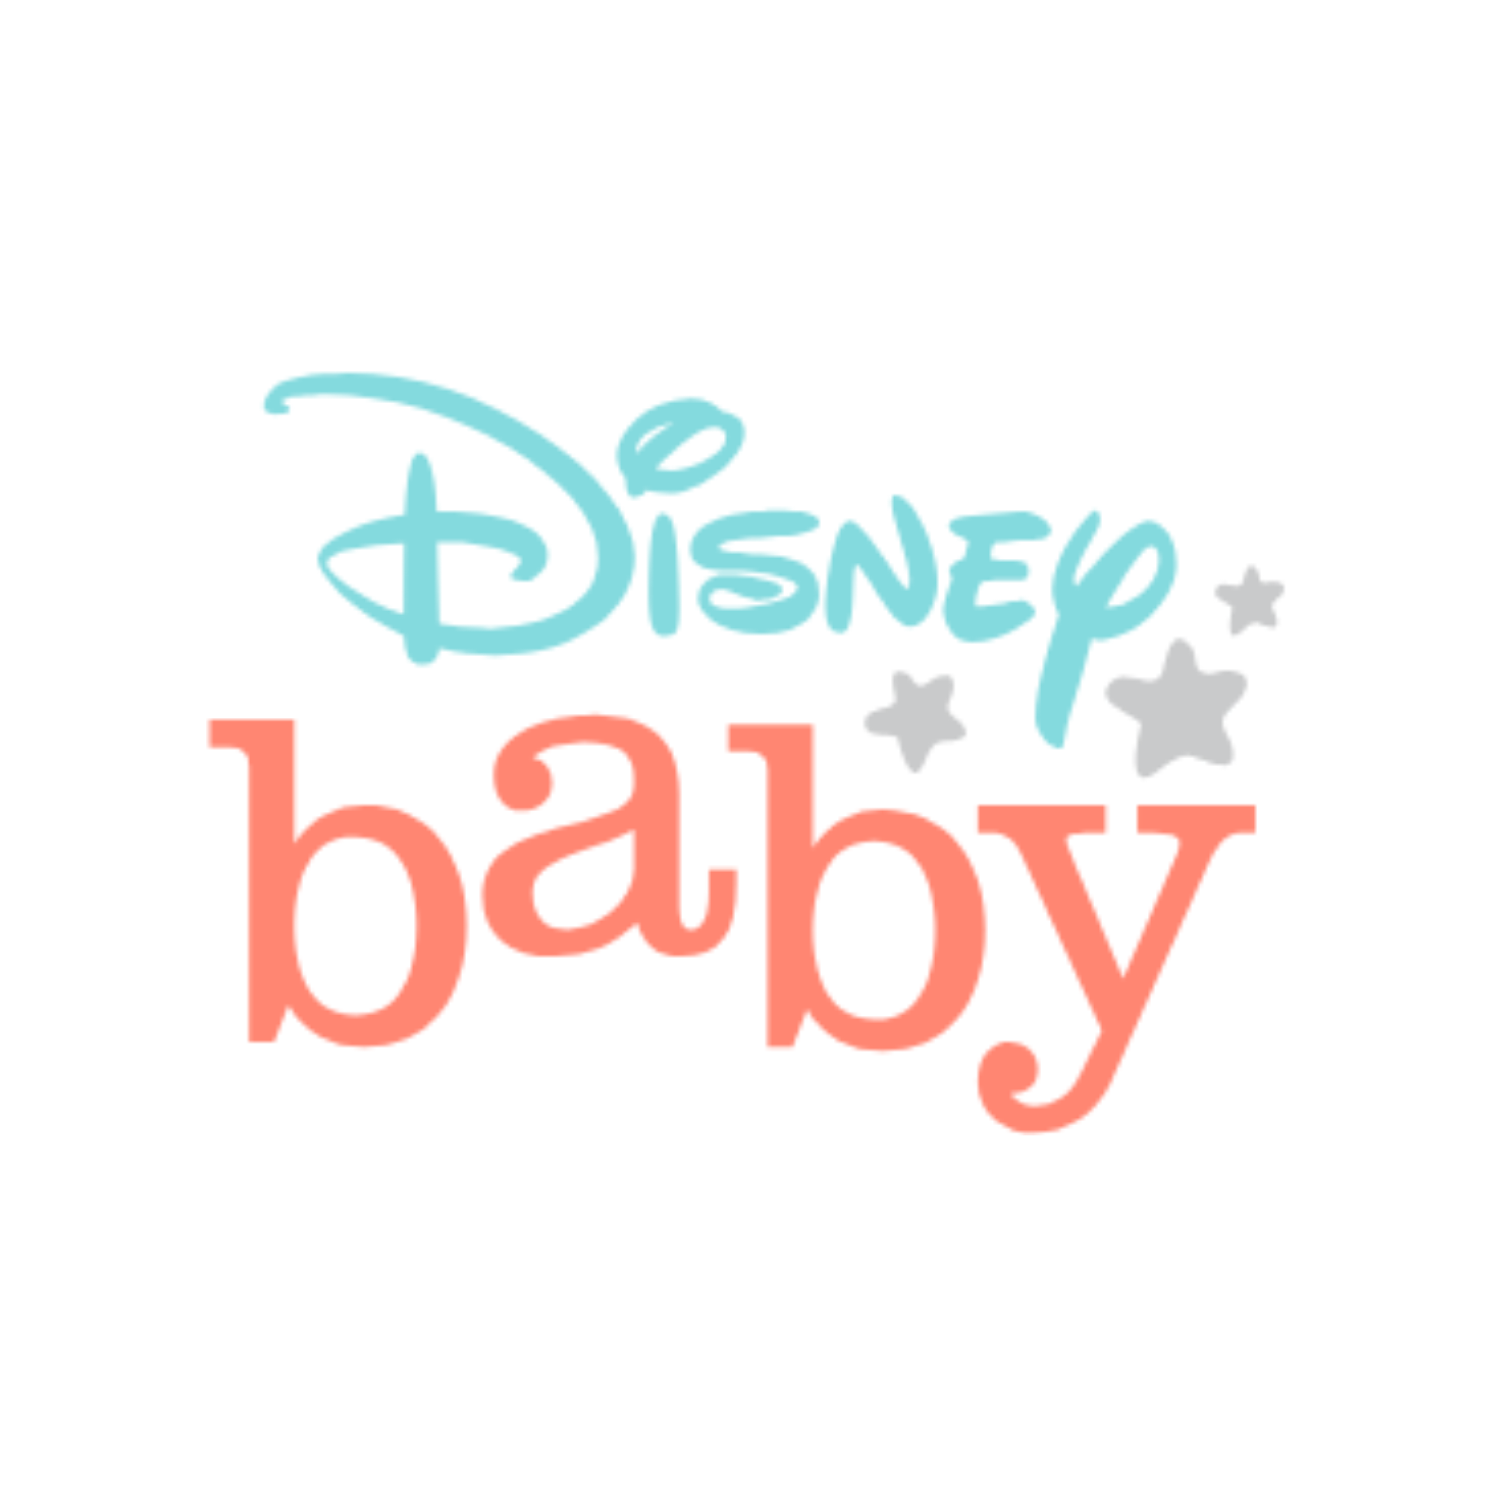 Shop Disney Baby products